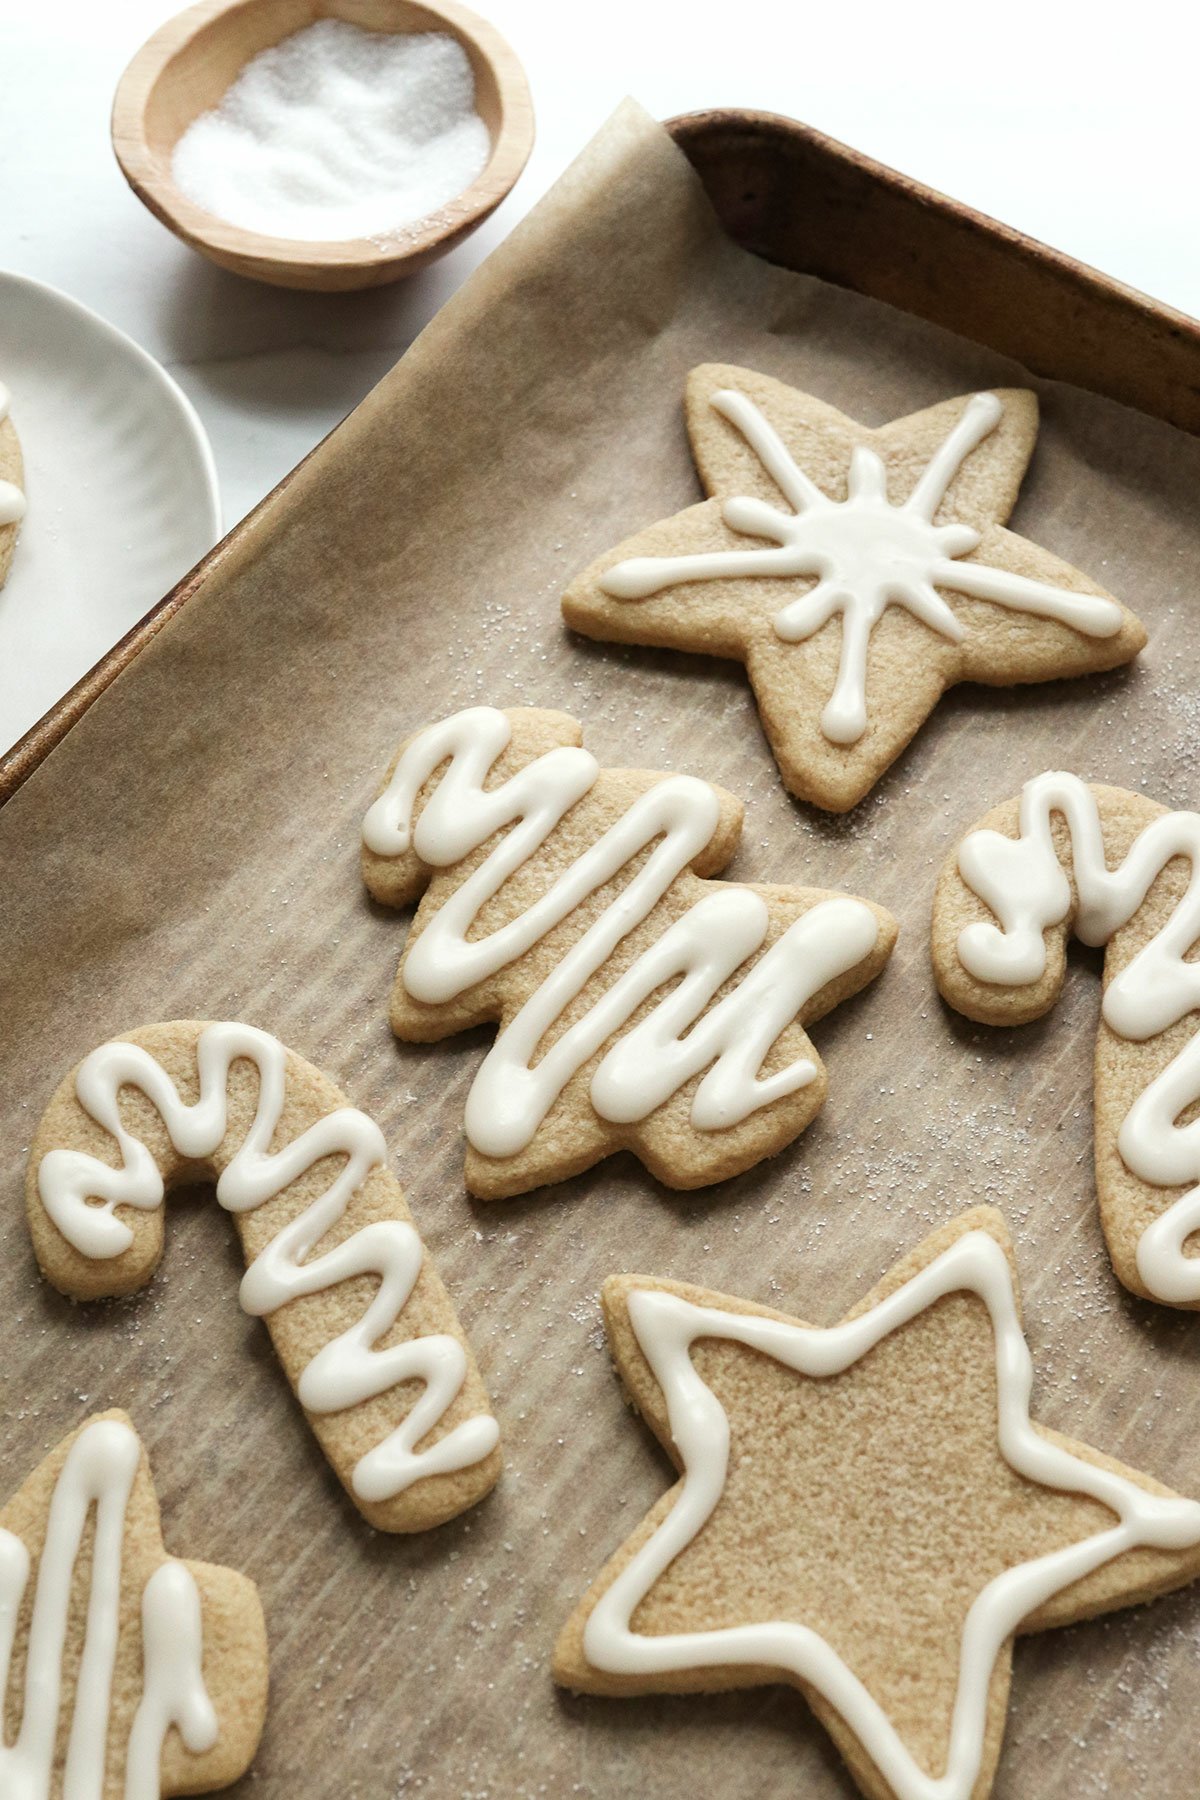 sugar cookies topped with white frosting.